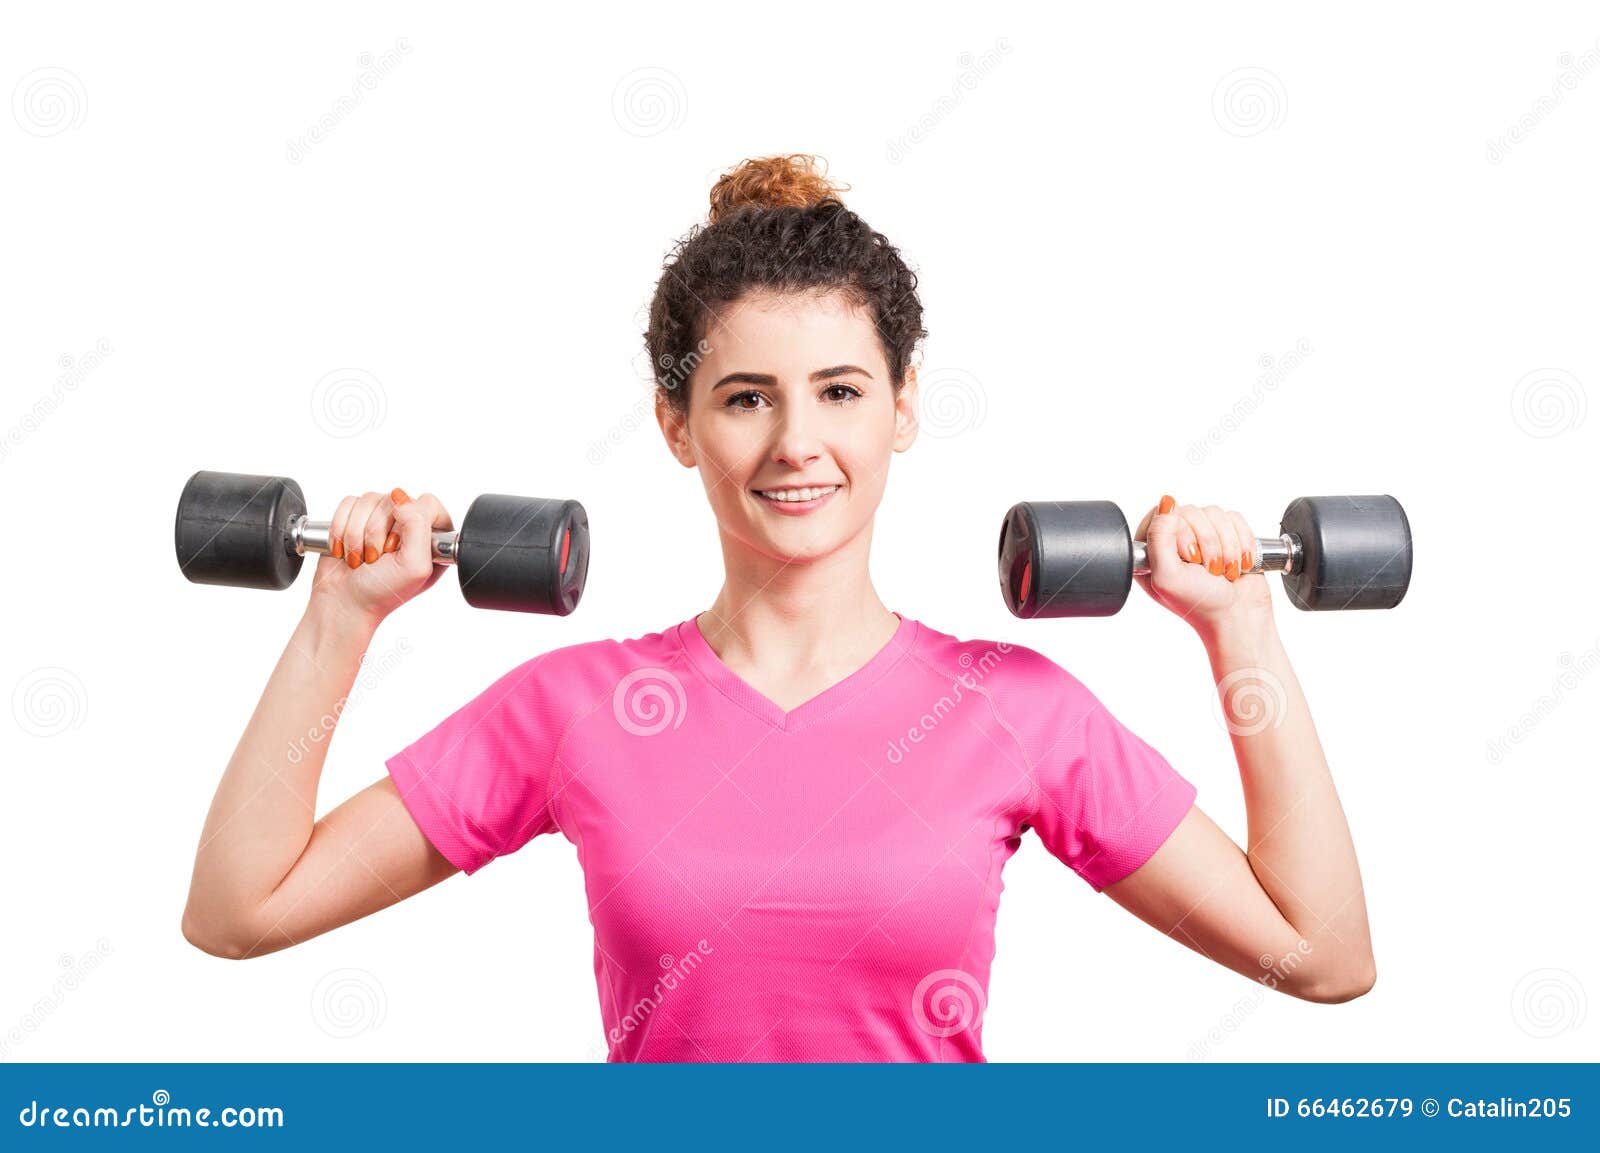 fit young woman training her deltoids with barbells